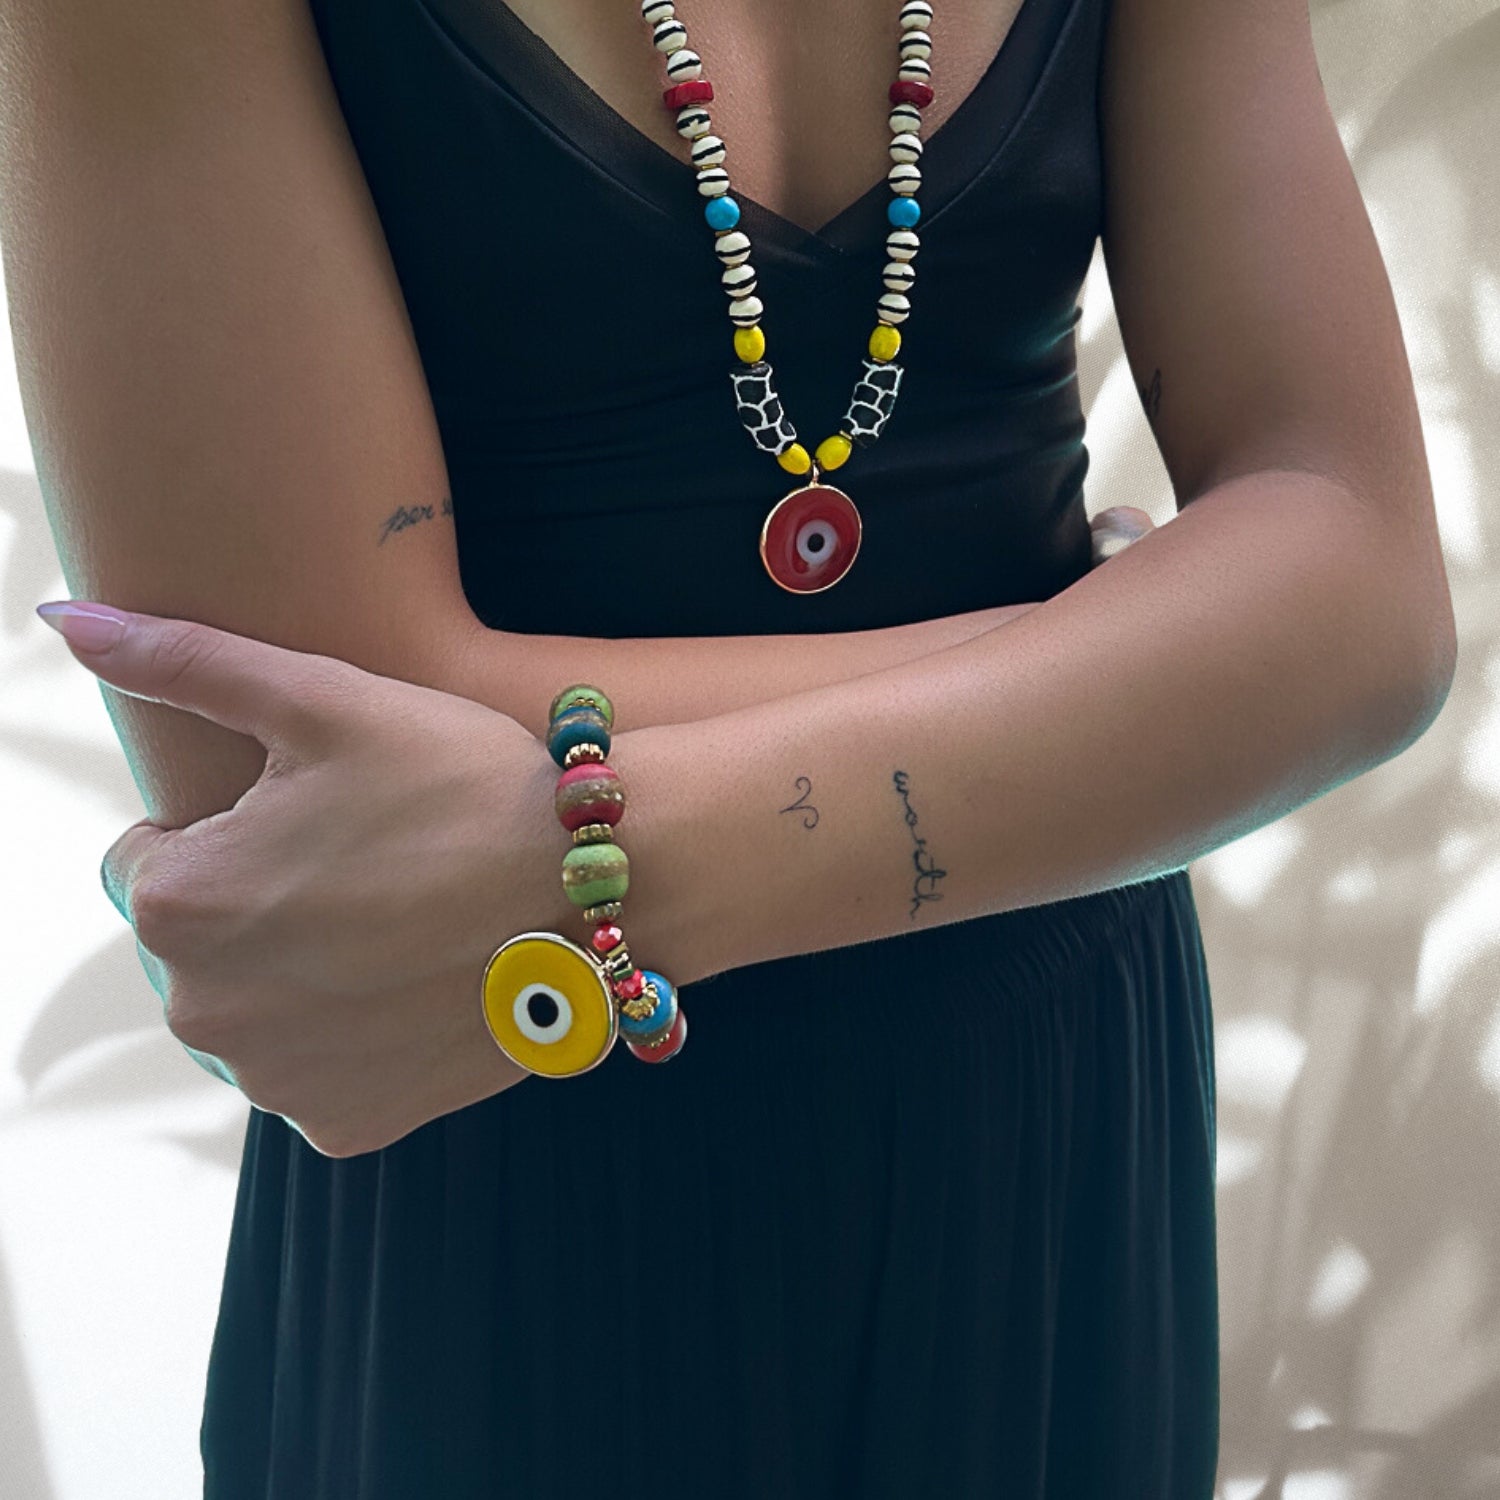 See how the Yellow Evil Eye Carpe Diem Bracelet adorns the hand model&#39;s wrist, adding a pop of color and reflecting her adventurous spirit.